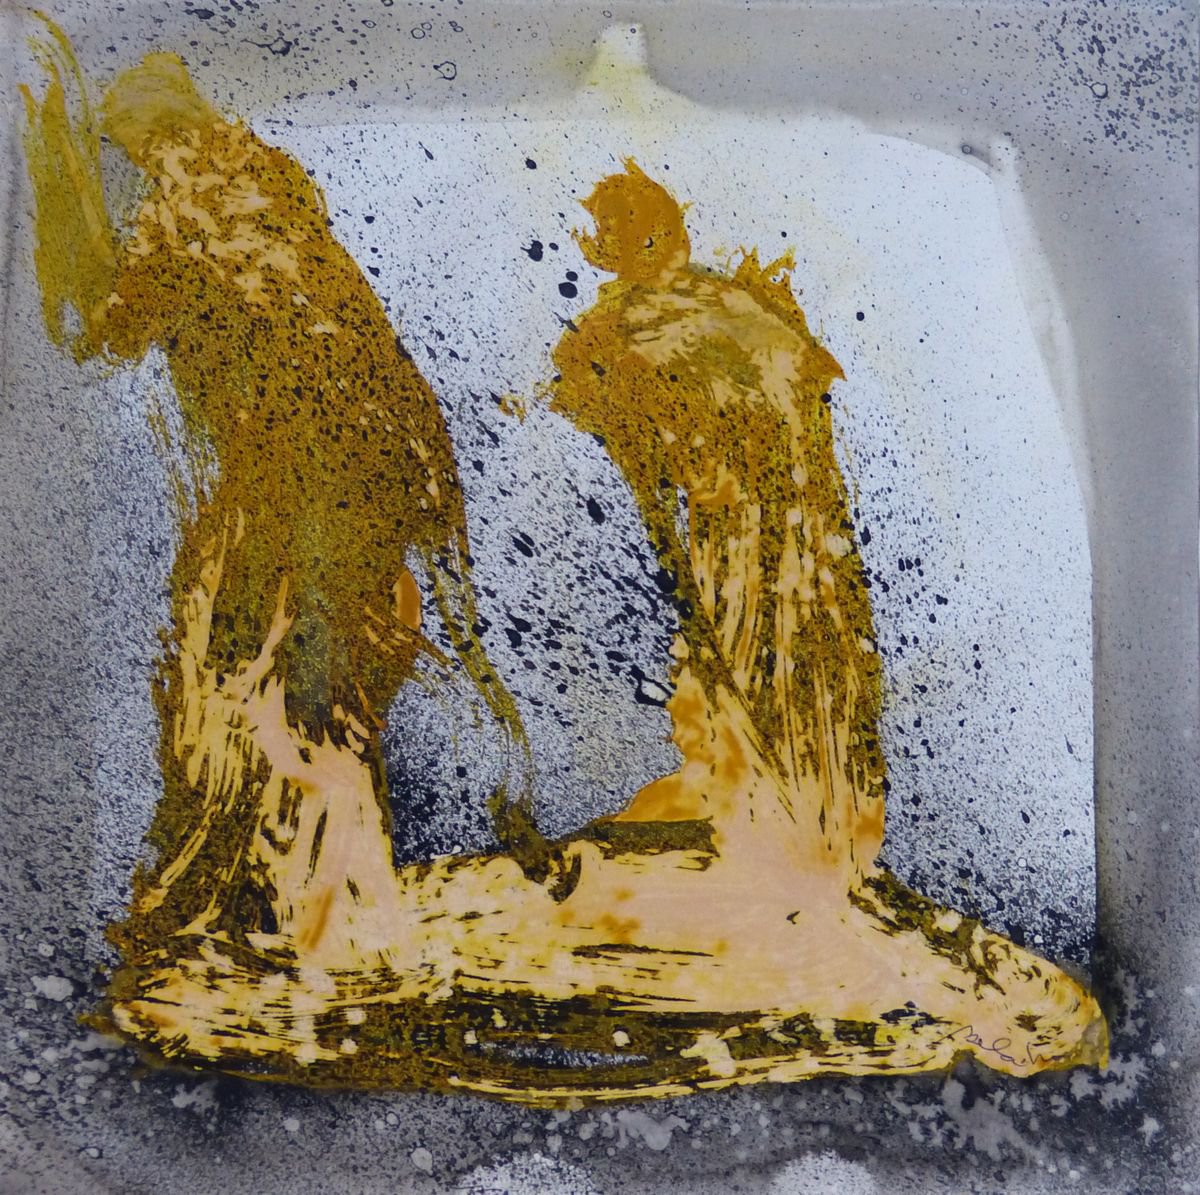 The Melting Point (Metamorphosis 1), 30x30 cm by Frederic Belaubre